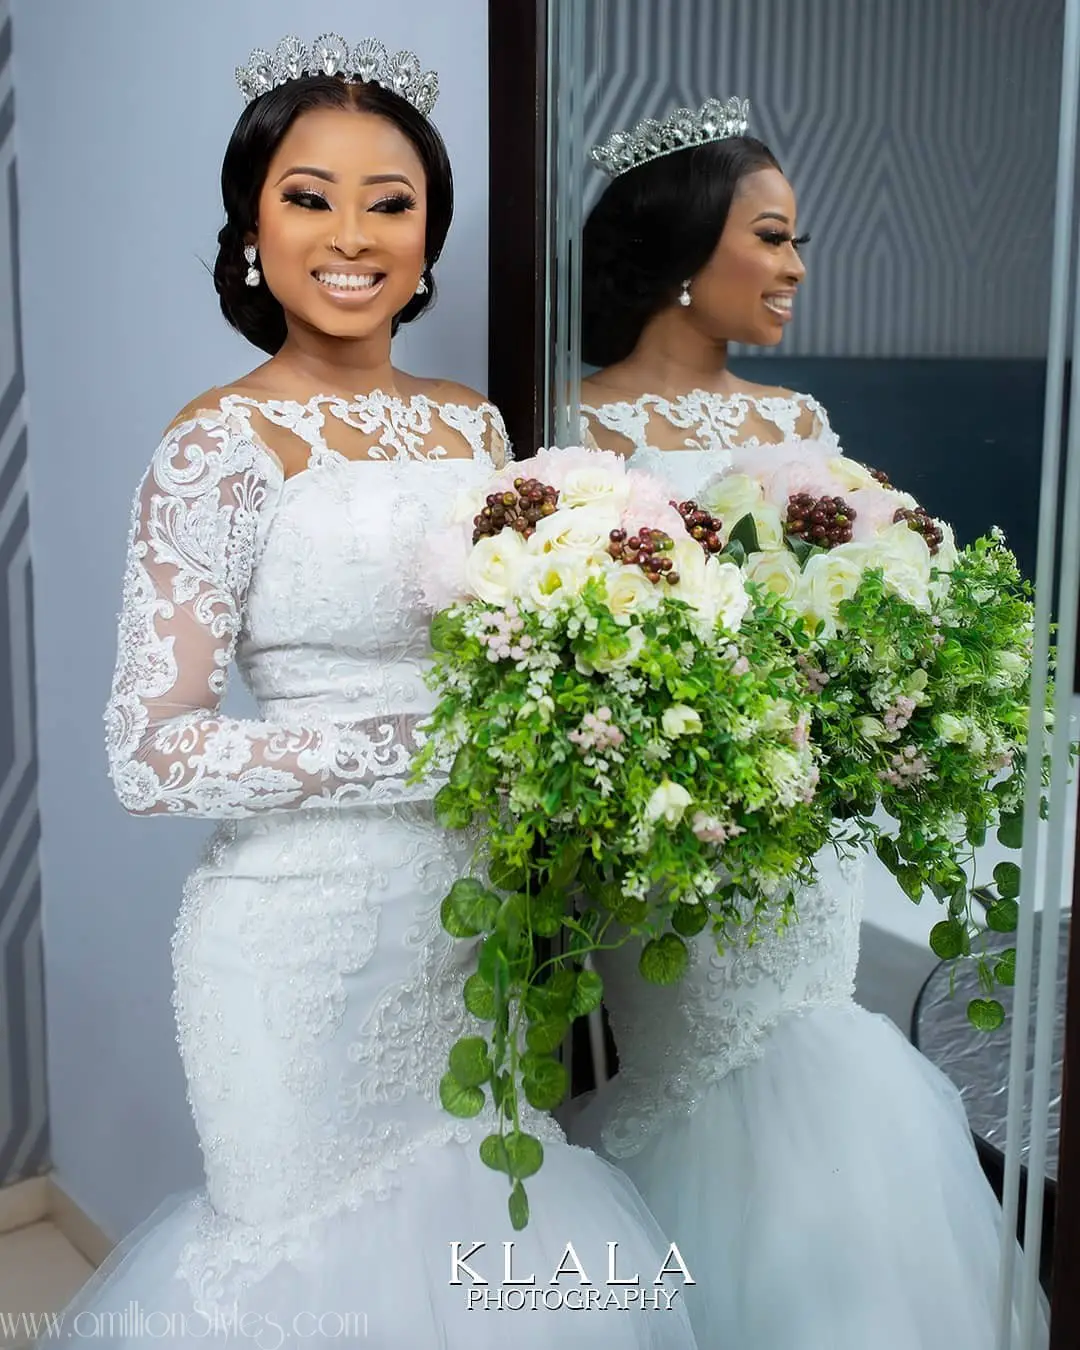 Every Intending Bride Will Love These Gorgeous Wedding Gowns